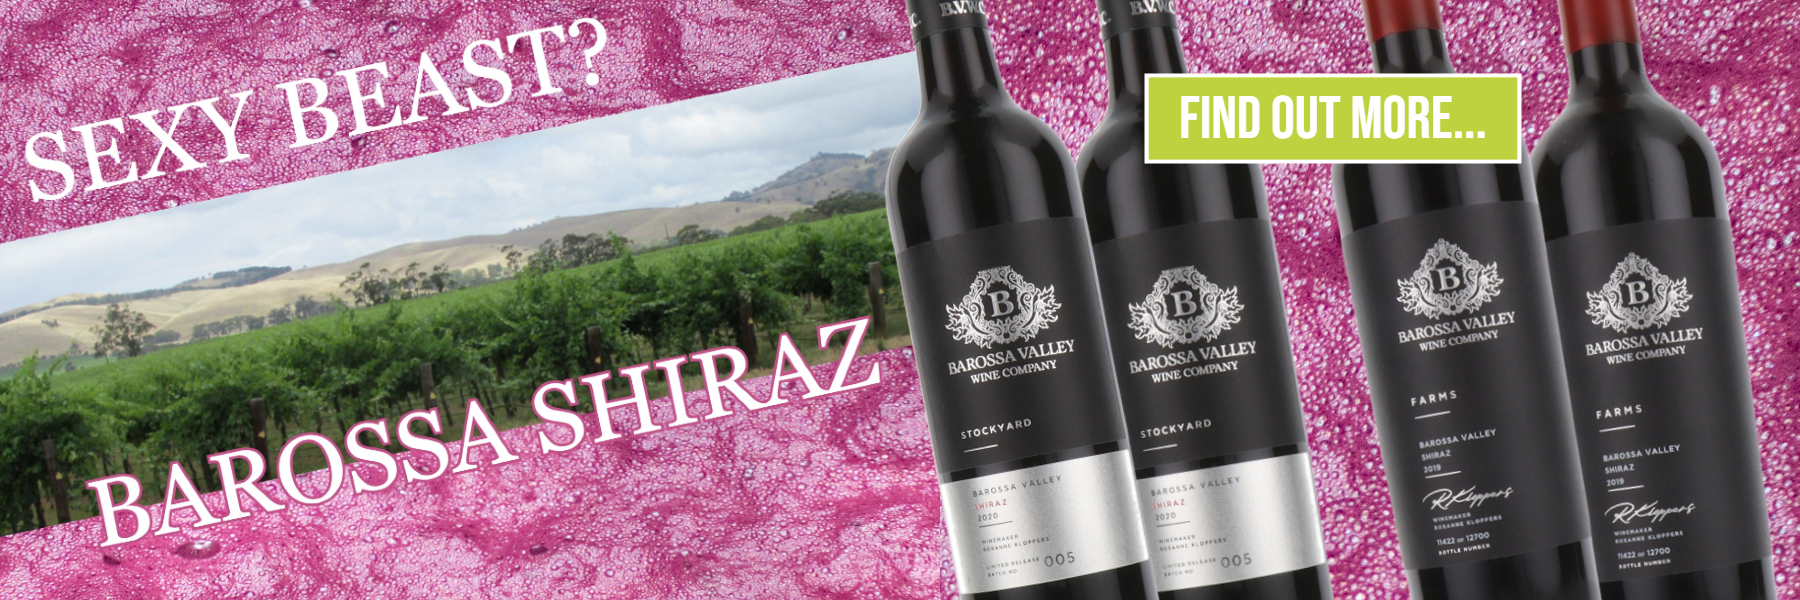 Find out more about Barossa Valley Wine Company's wines at Frazier's